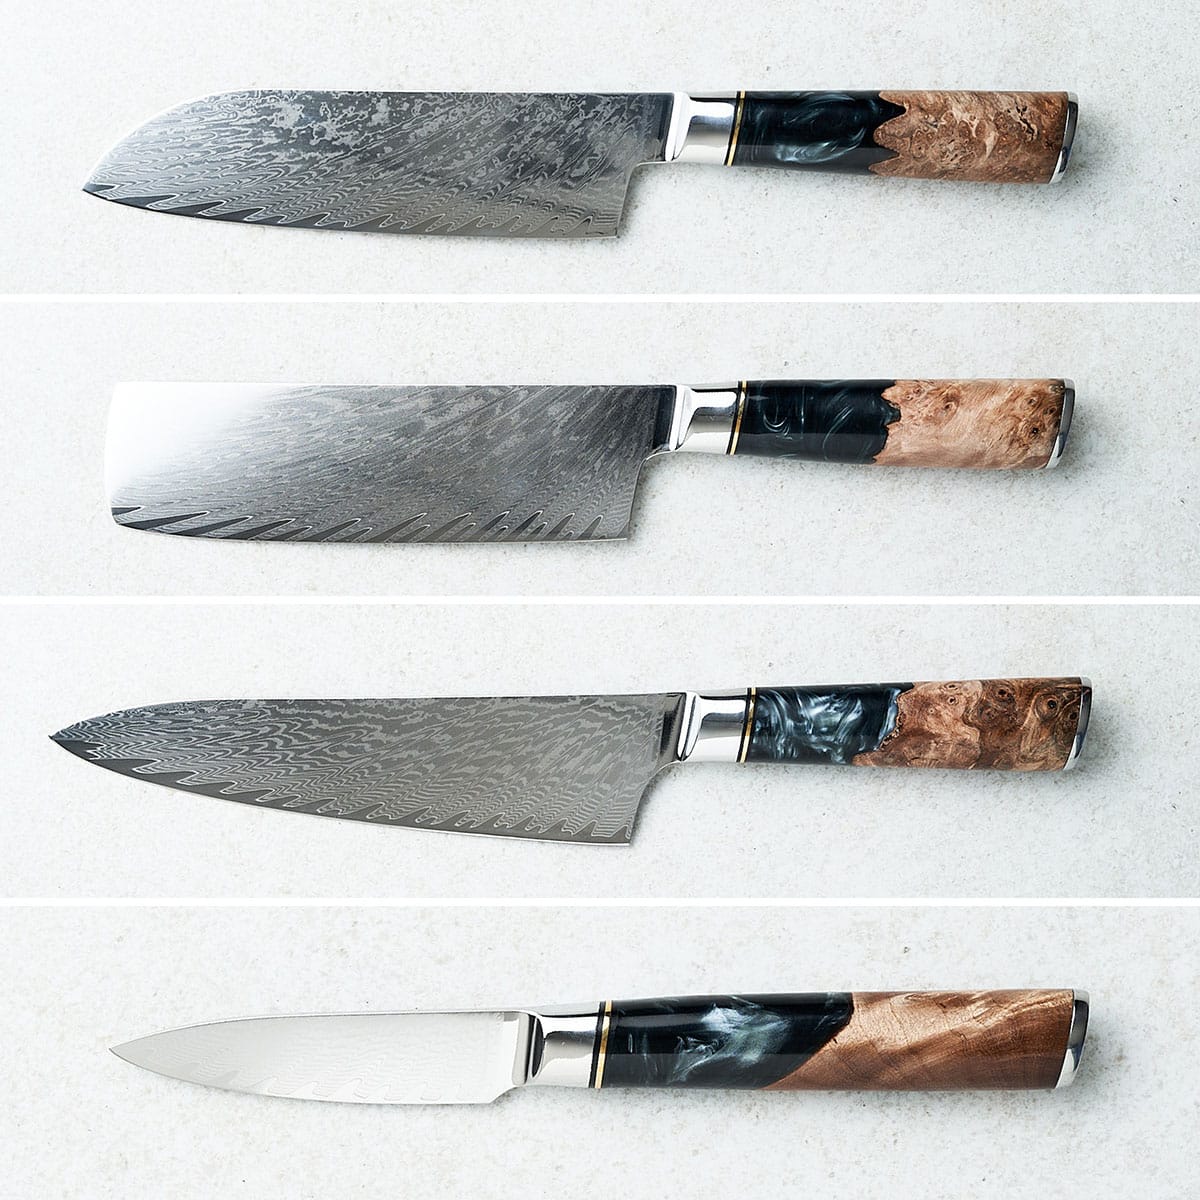 Four types of knives on white background.